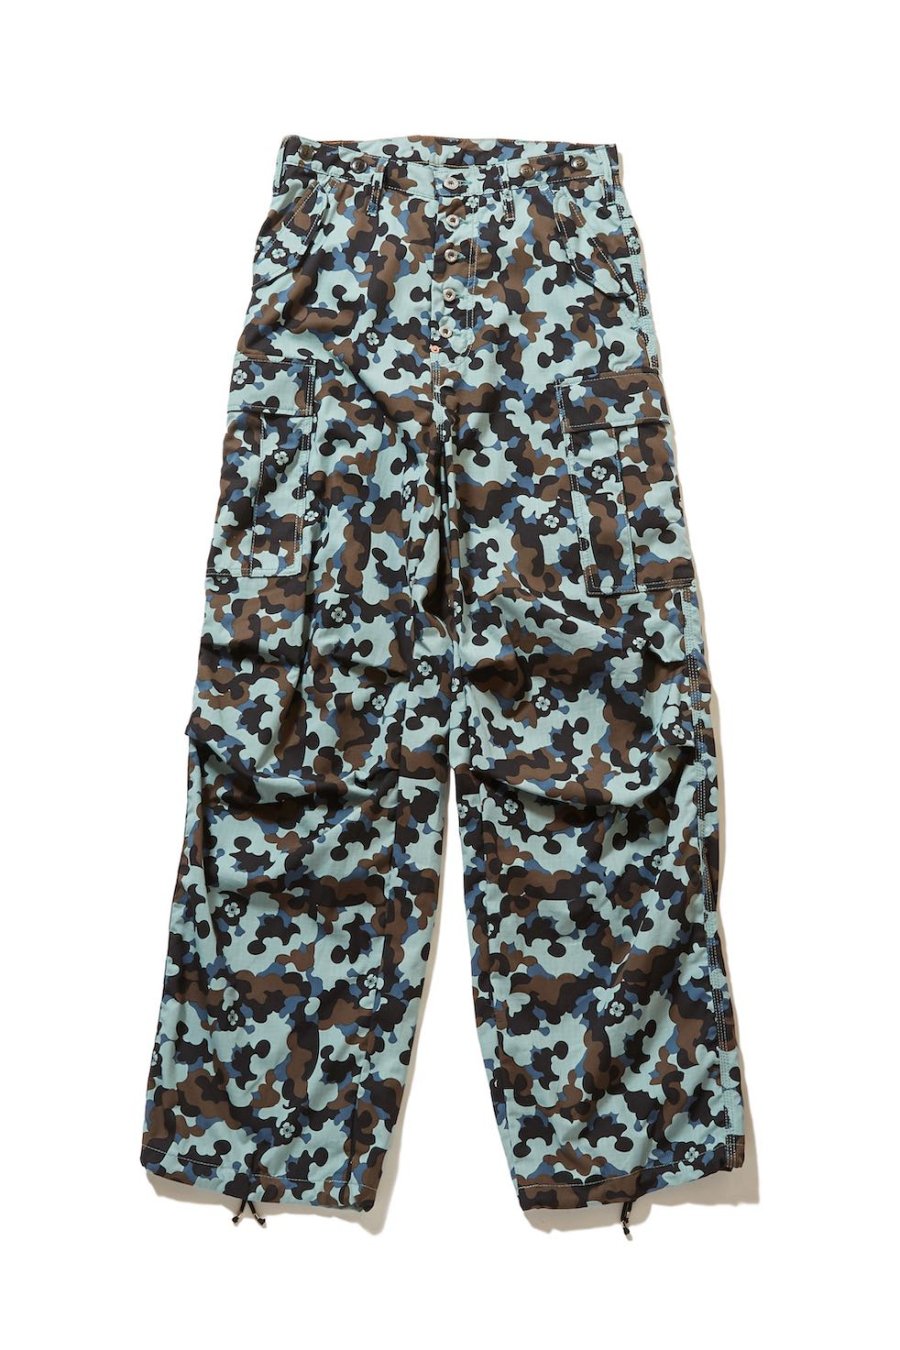 SUGARHILL  FLOWER CAMO CARGO TROUSERS(BLUE CAMO)<img class='new_mark_img2' src='https://img.shop-pro.jp/img/new/icons15.gif' style='border:none;display:inline;margin:0px;padding:0px;width:auto;' />